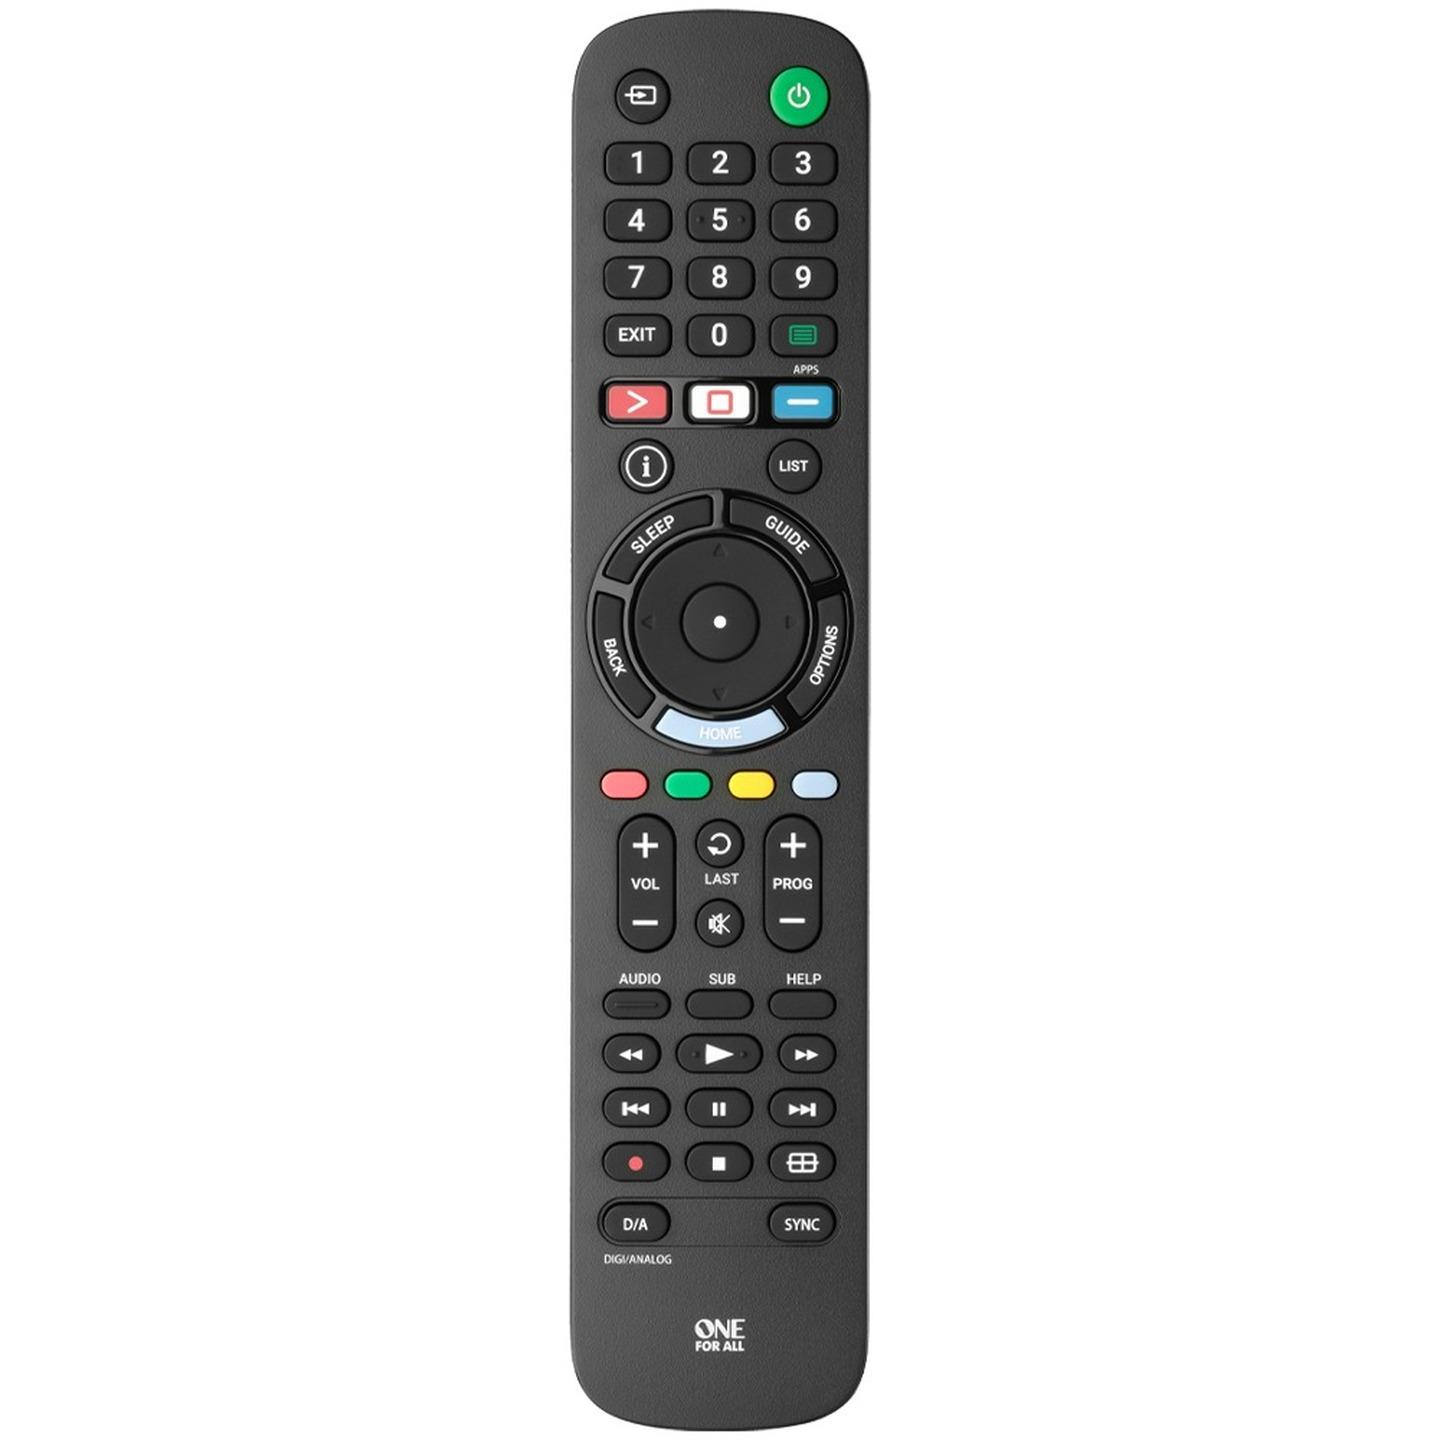 One For All Remote to Suit Sony TV with NET-TV